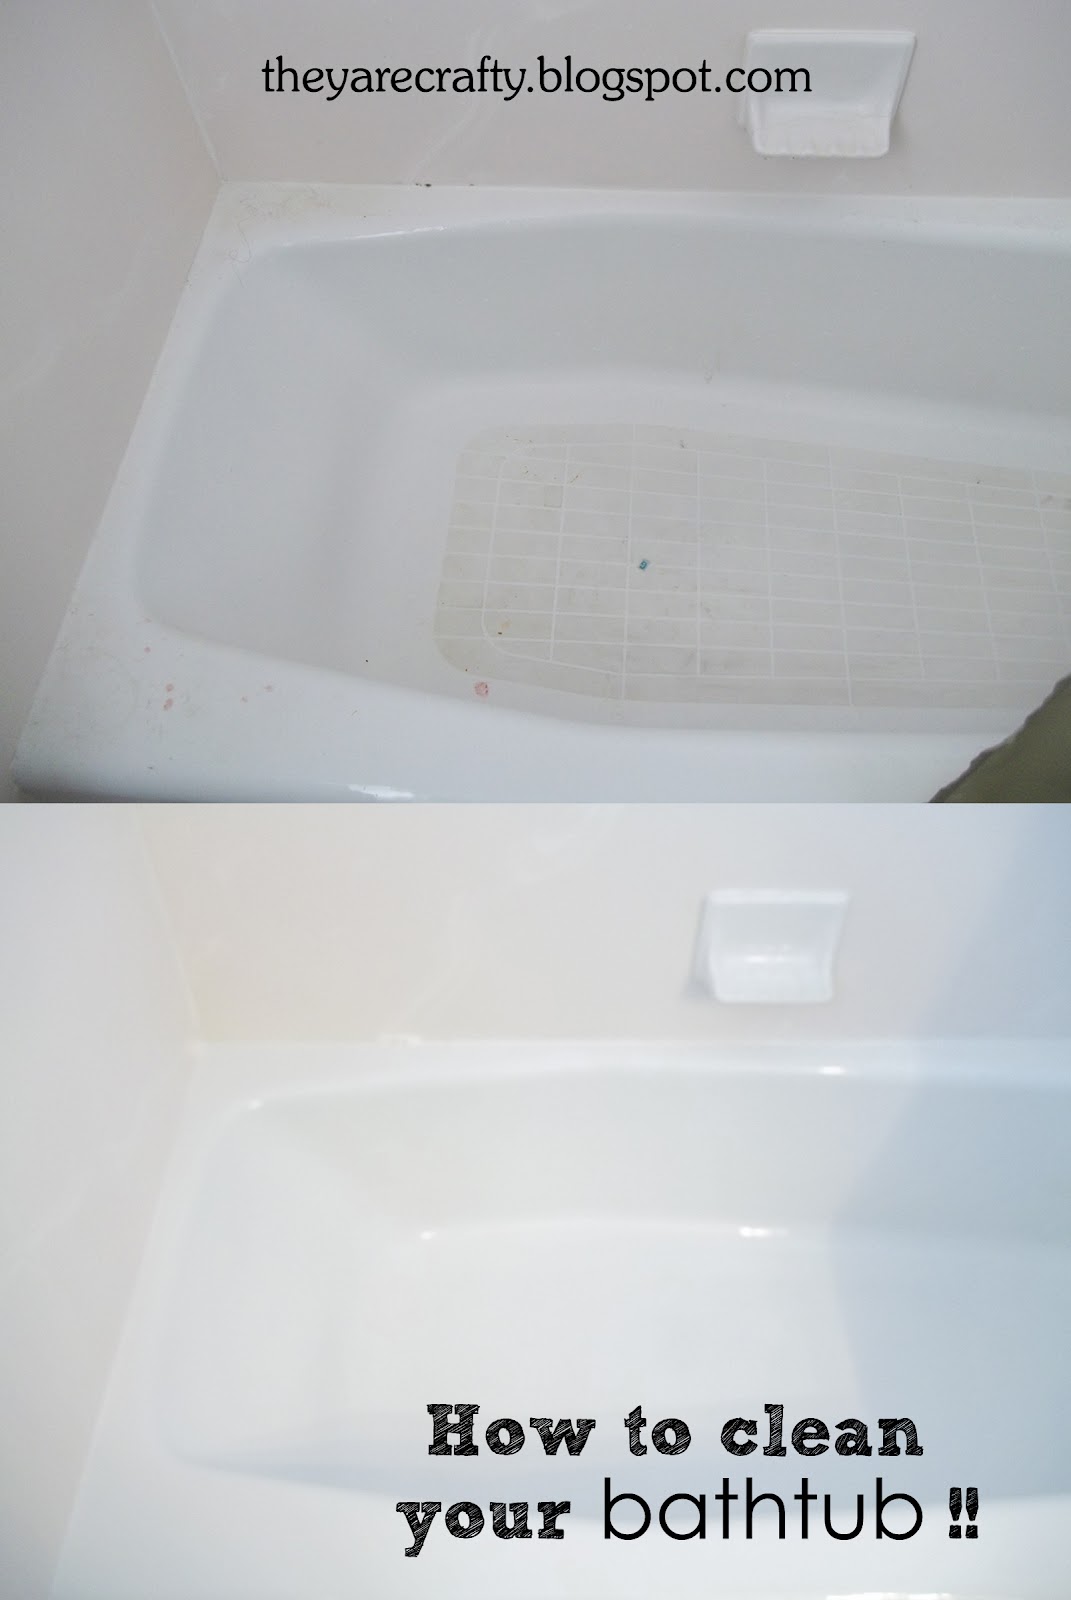 How to clean your bathtub